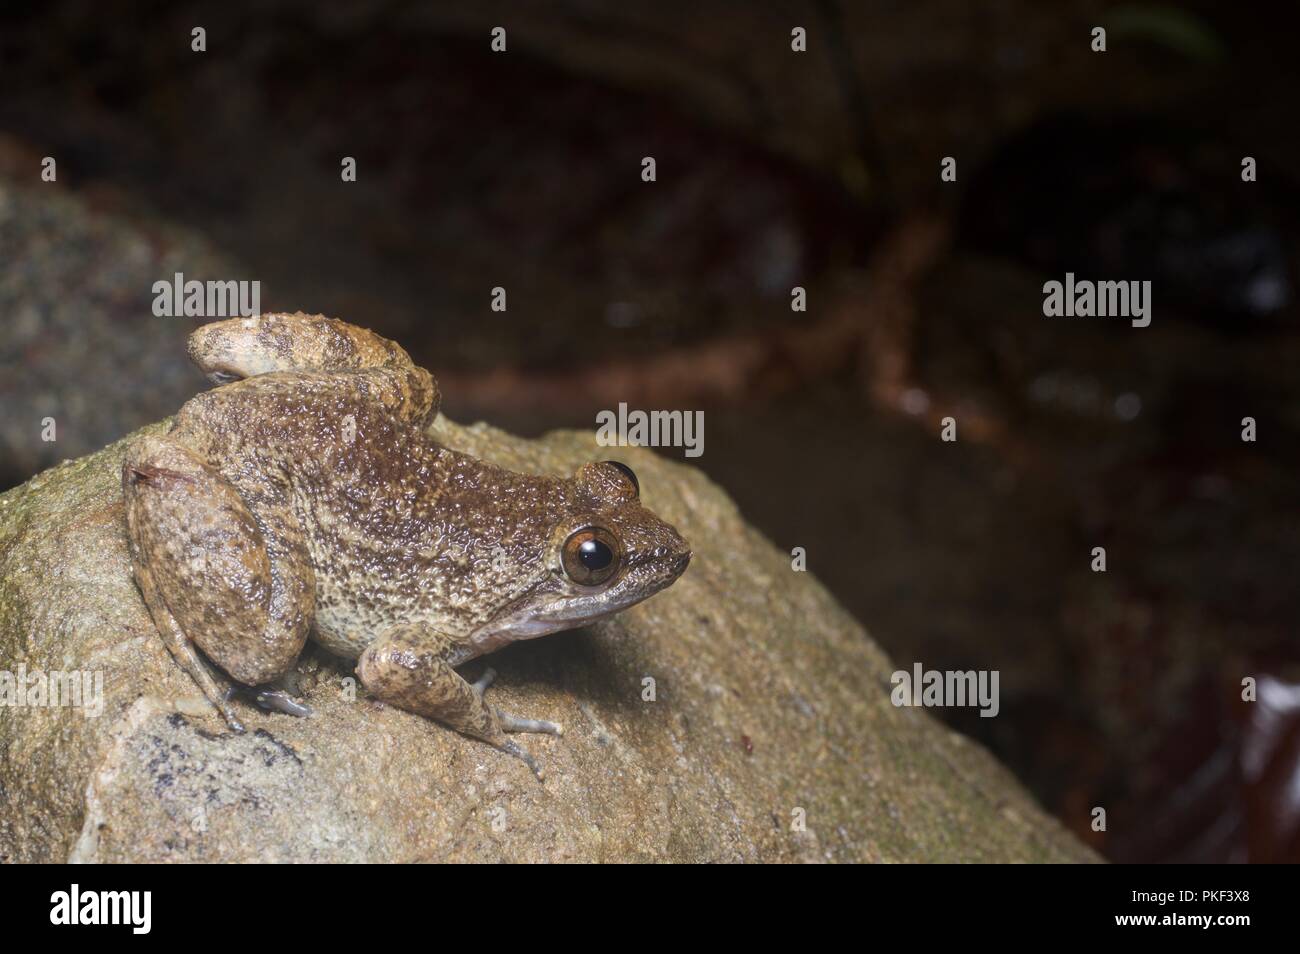 A Kuhl's Creek Frog (Limnonectes kuhlii) on a rock on the forest floor at night in Ranah, Sabah, East Malaysia, Borneo Stock Photo